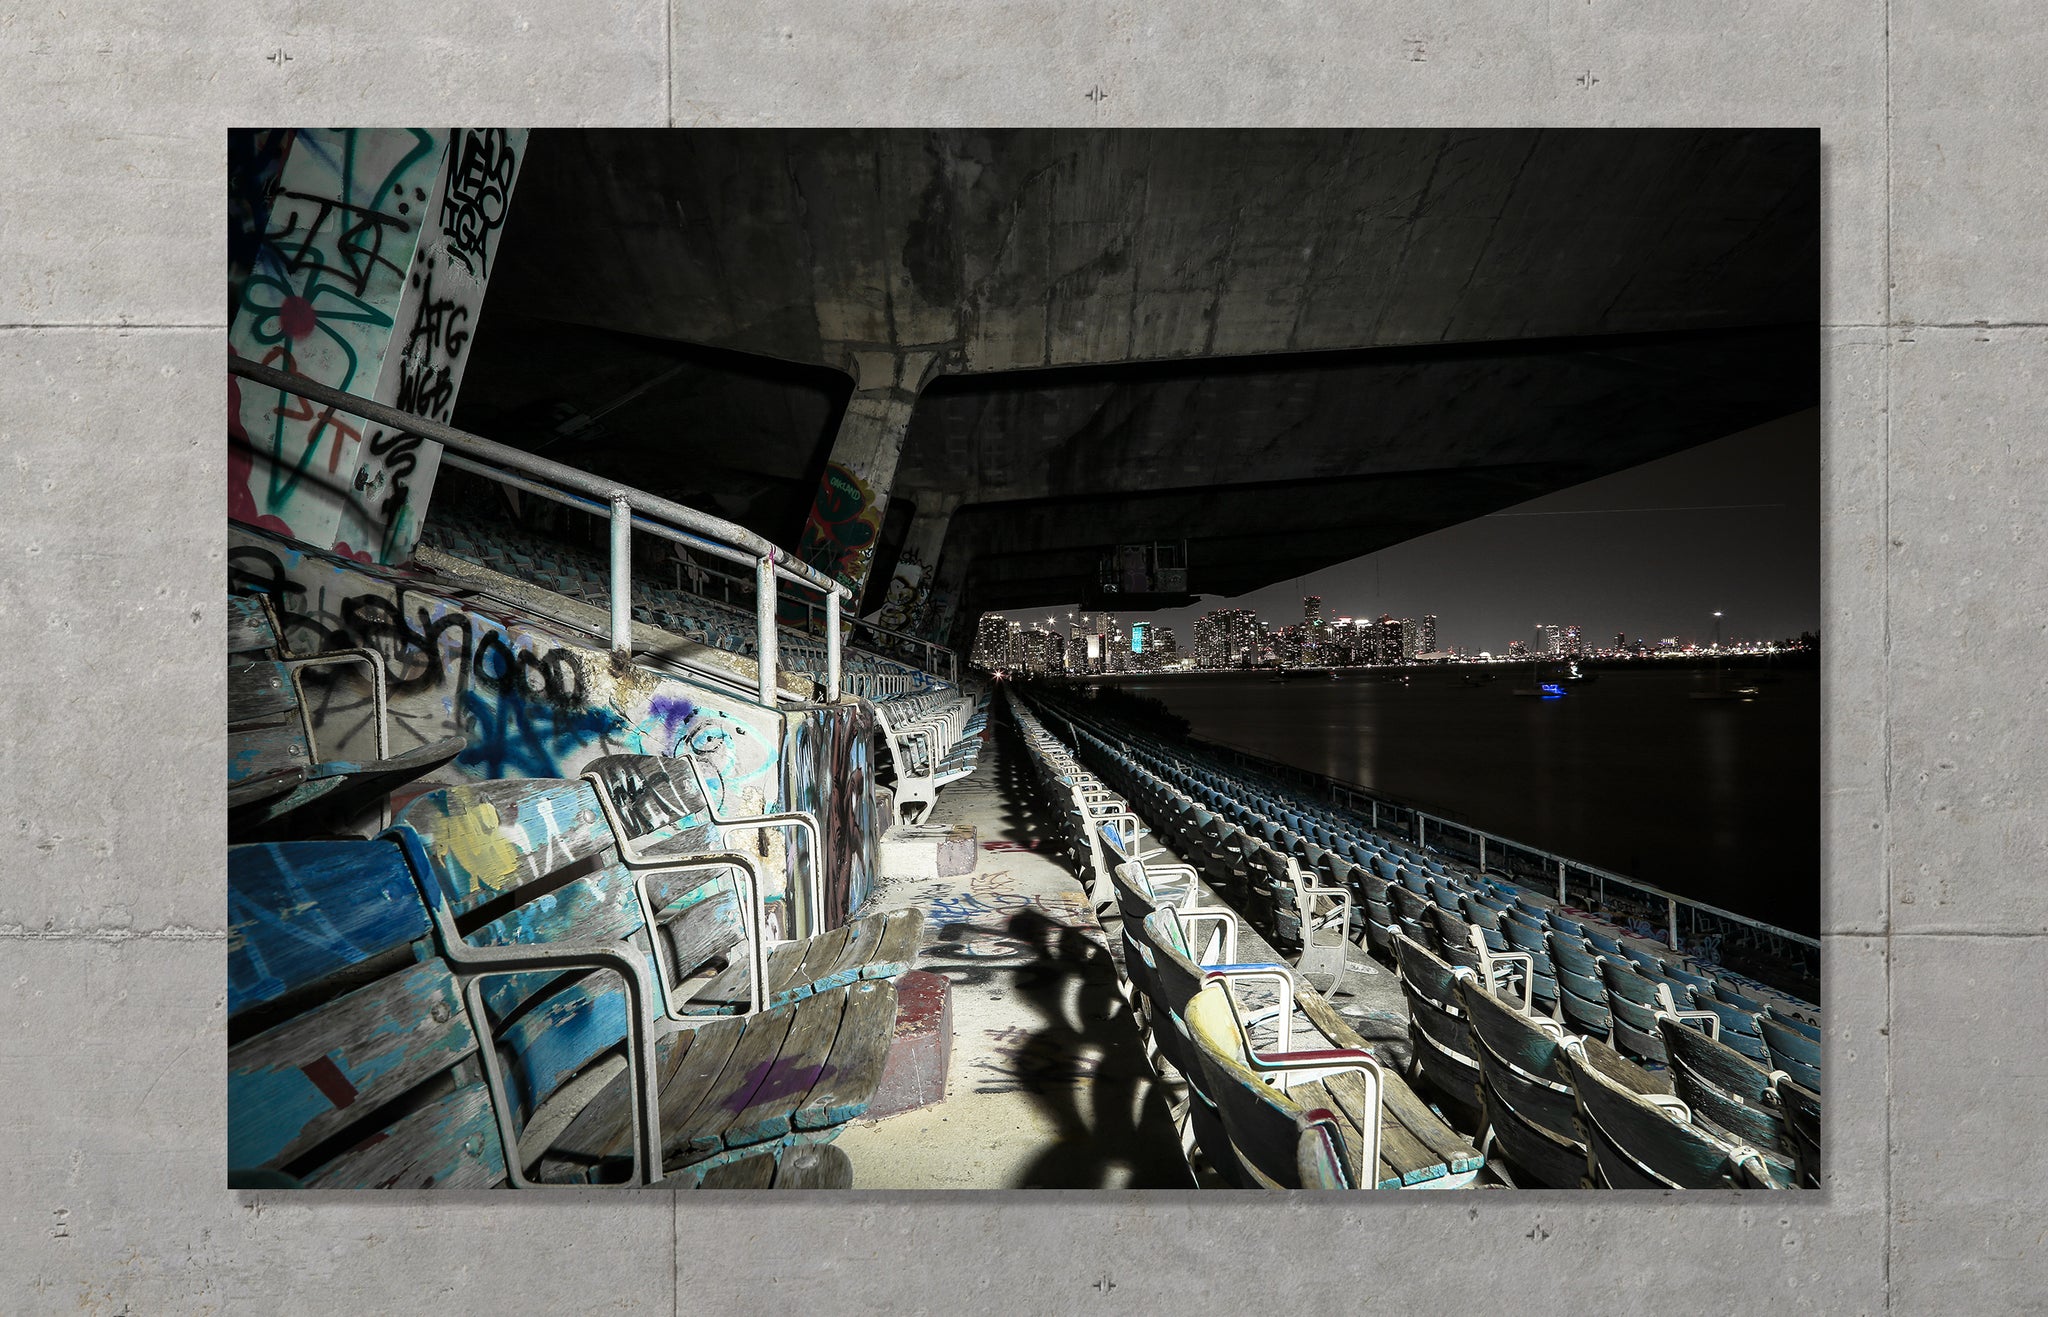 Miami Marine Stadium In Florida Has Been Abandoned For Years